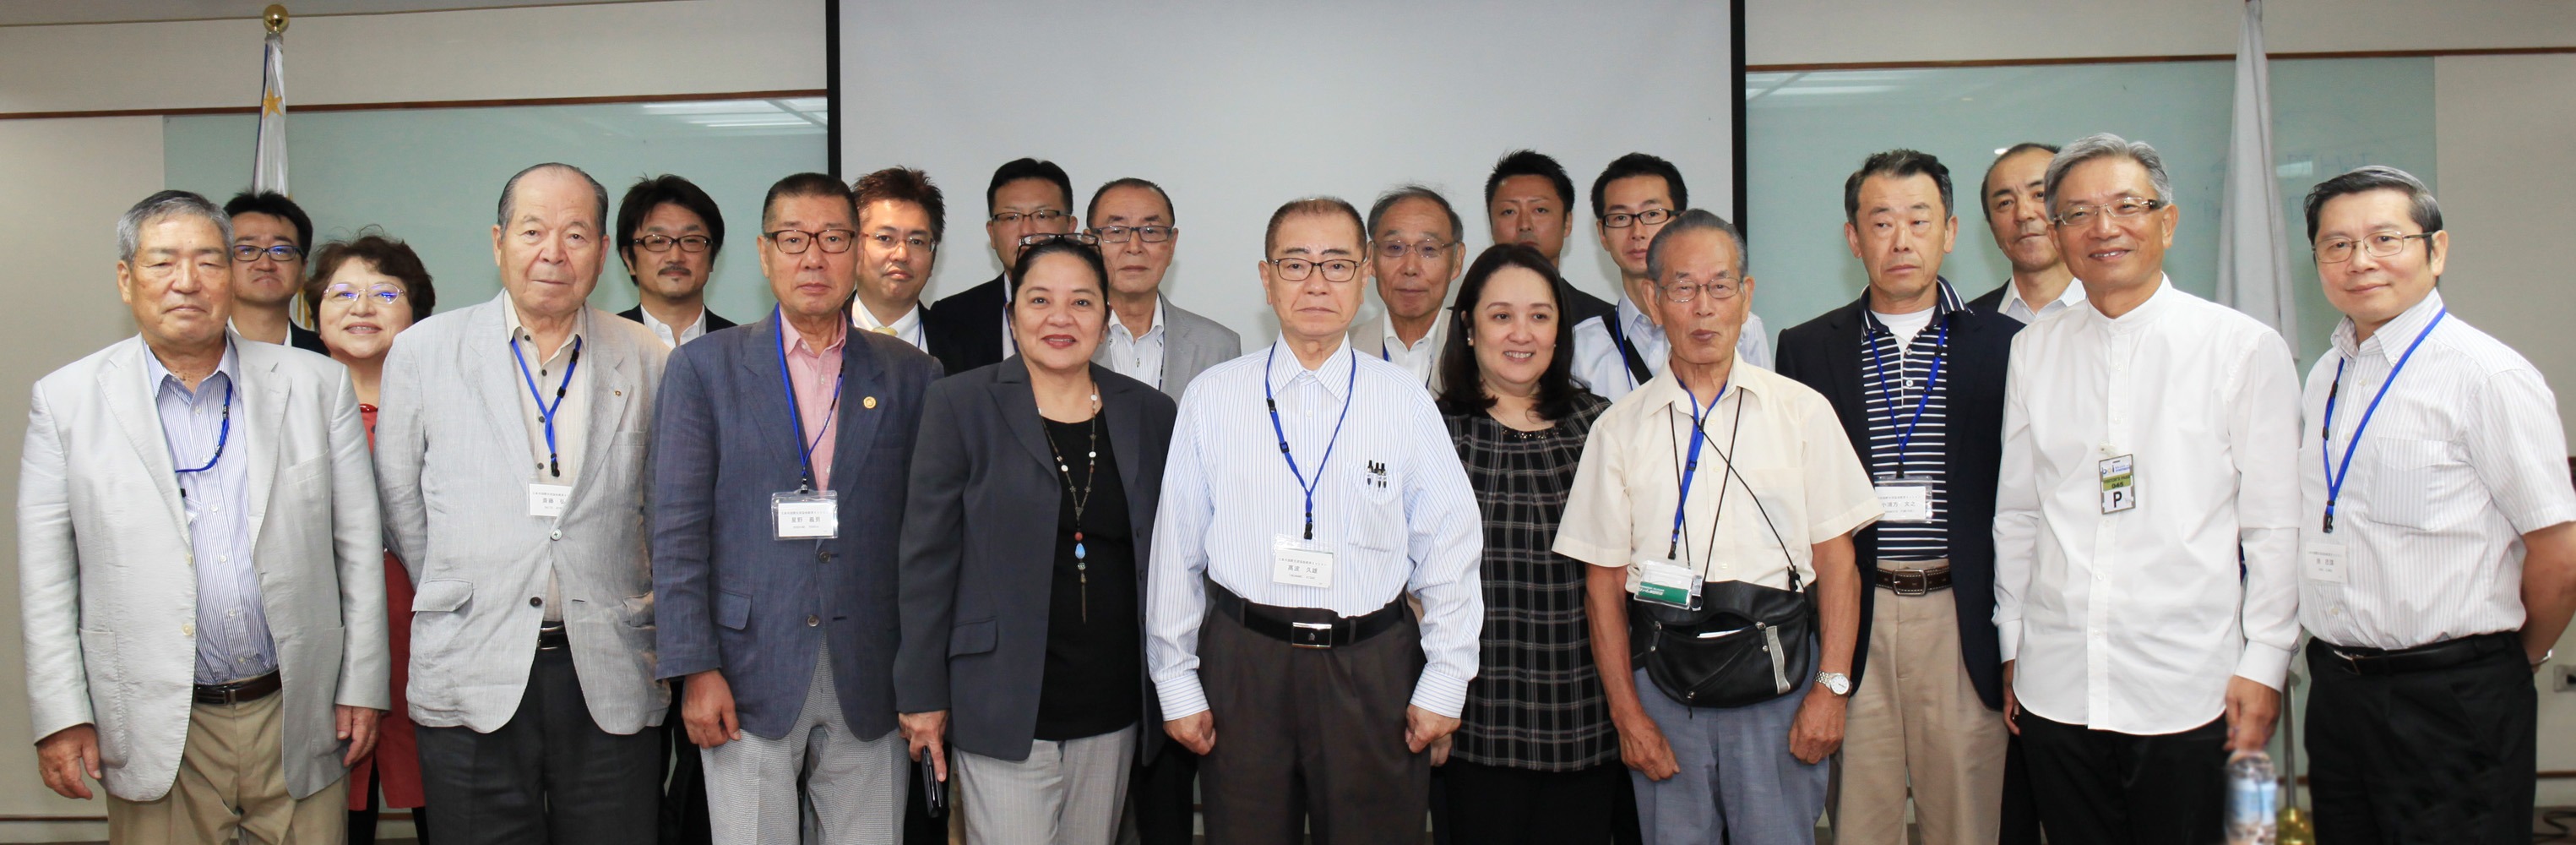 Group picture of The Board of Investments (BOI) led by Director for International Investment Promotion Service Ms. Angelica Cayas along with STR Dita Angara-Mathay, Commercial Counselor of the Philippine Trade and Investment Center – Tokyo pose with members of the Sanjo District International Association of Niigata Prefecture in Japan led by by Mr. Hisao Takanami and Mr. Kiyosada Egawa, President of Biotech Japan after the investment briefing held in Makati City.